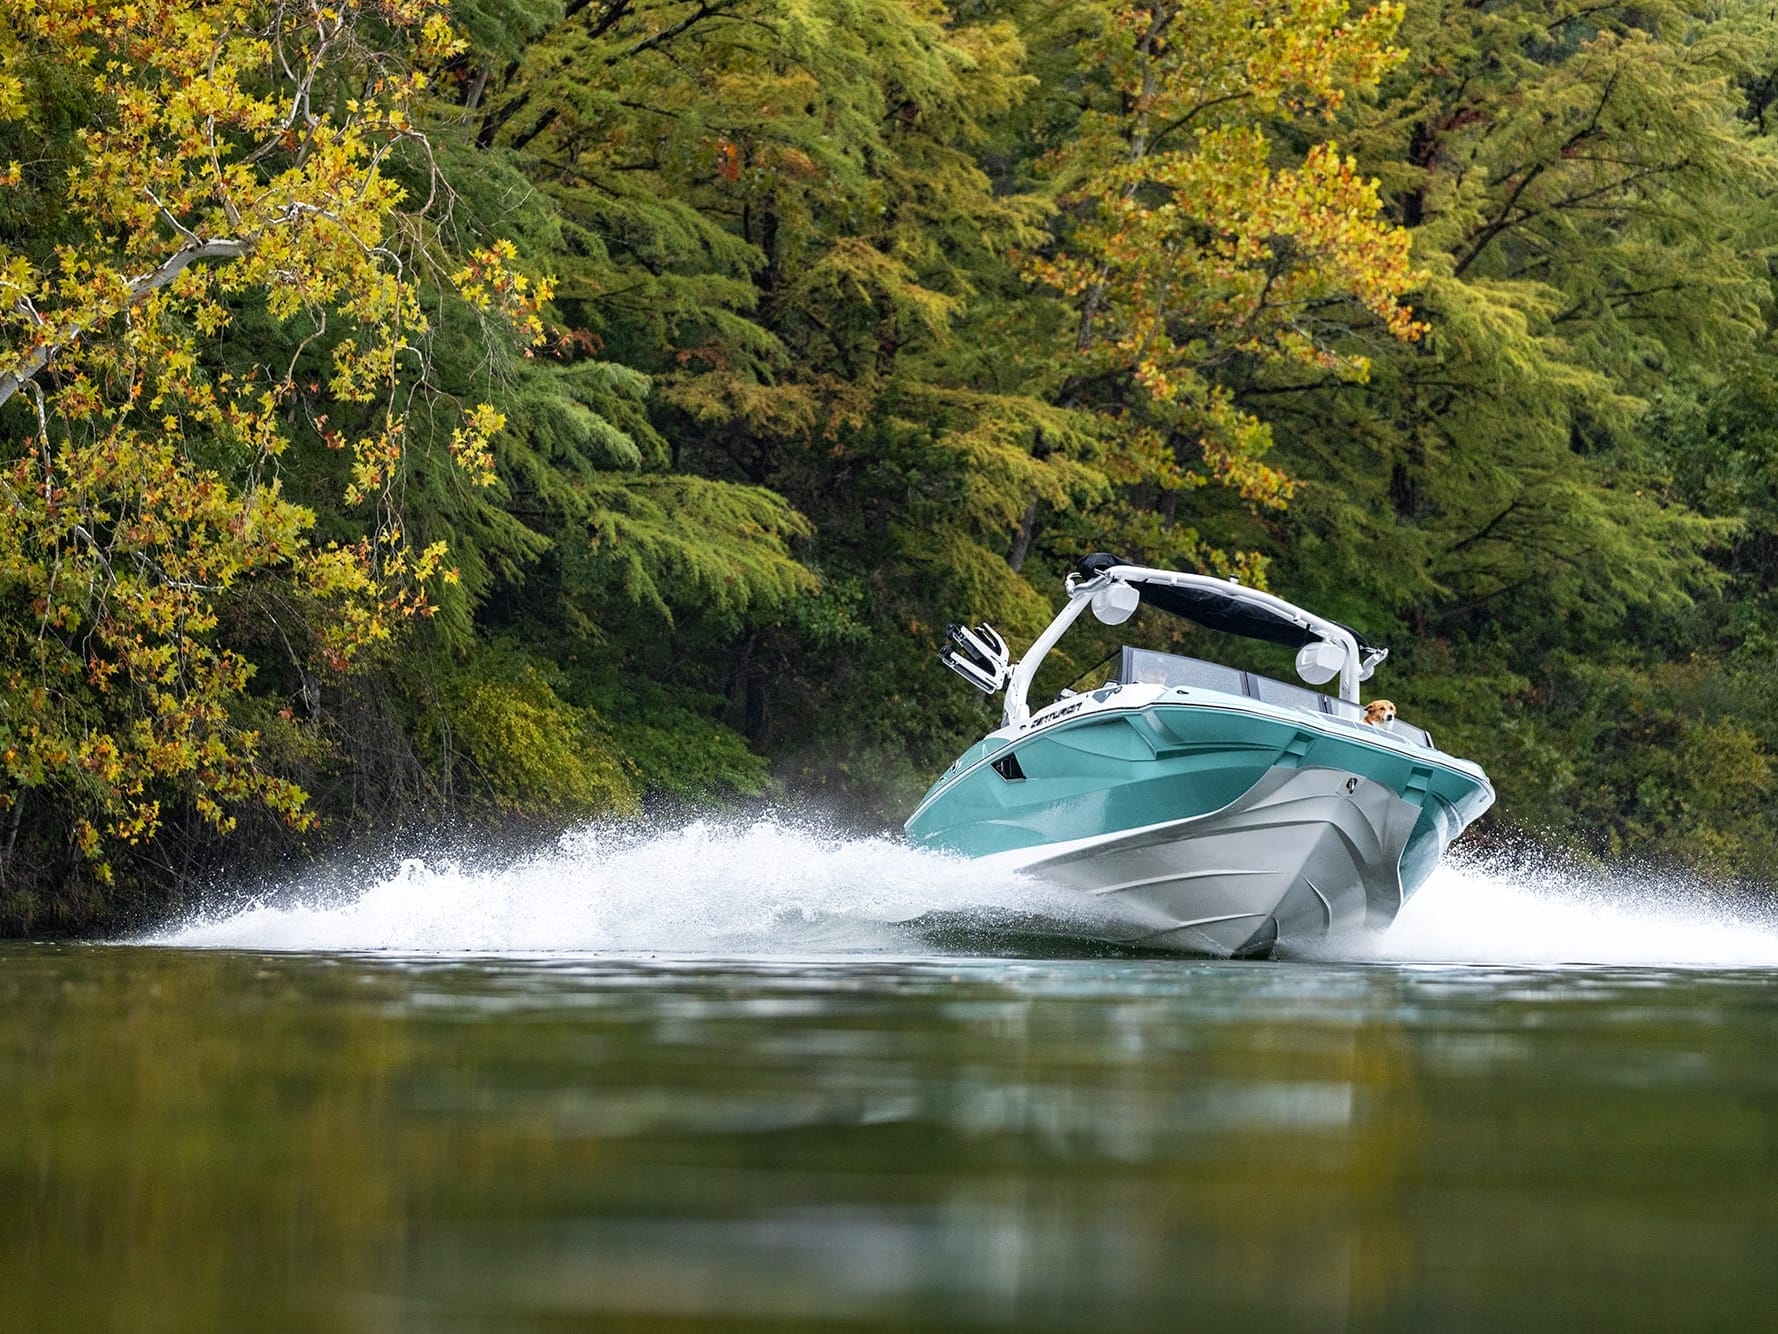 A Centurion Fe22 boat is speeding through a body of water.